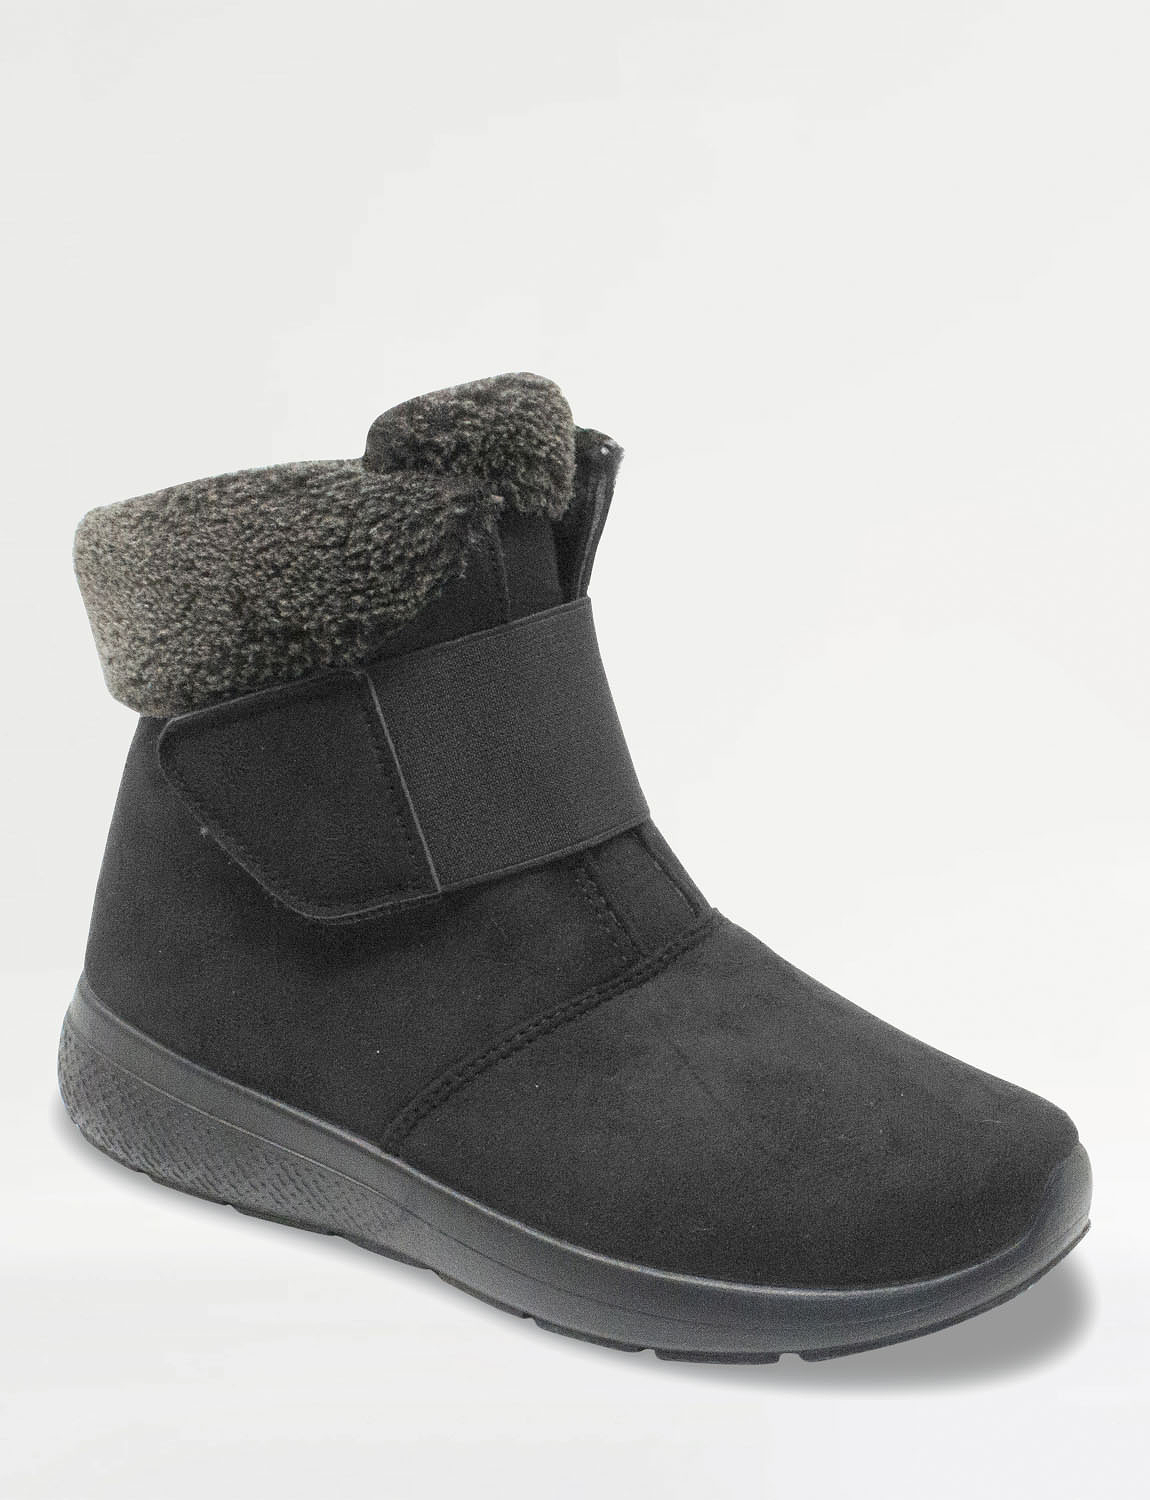 Dr Keller Wide Fit Touch Fasten Sherpa Trim Boot | Chums